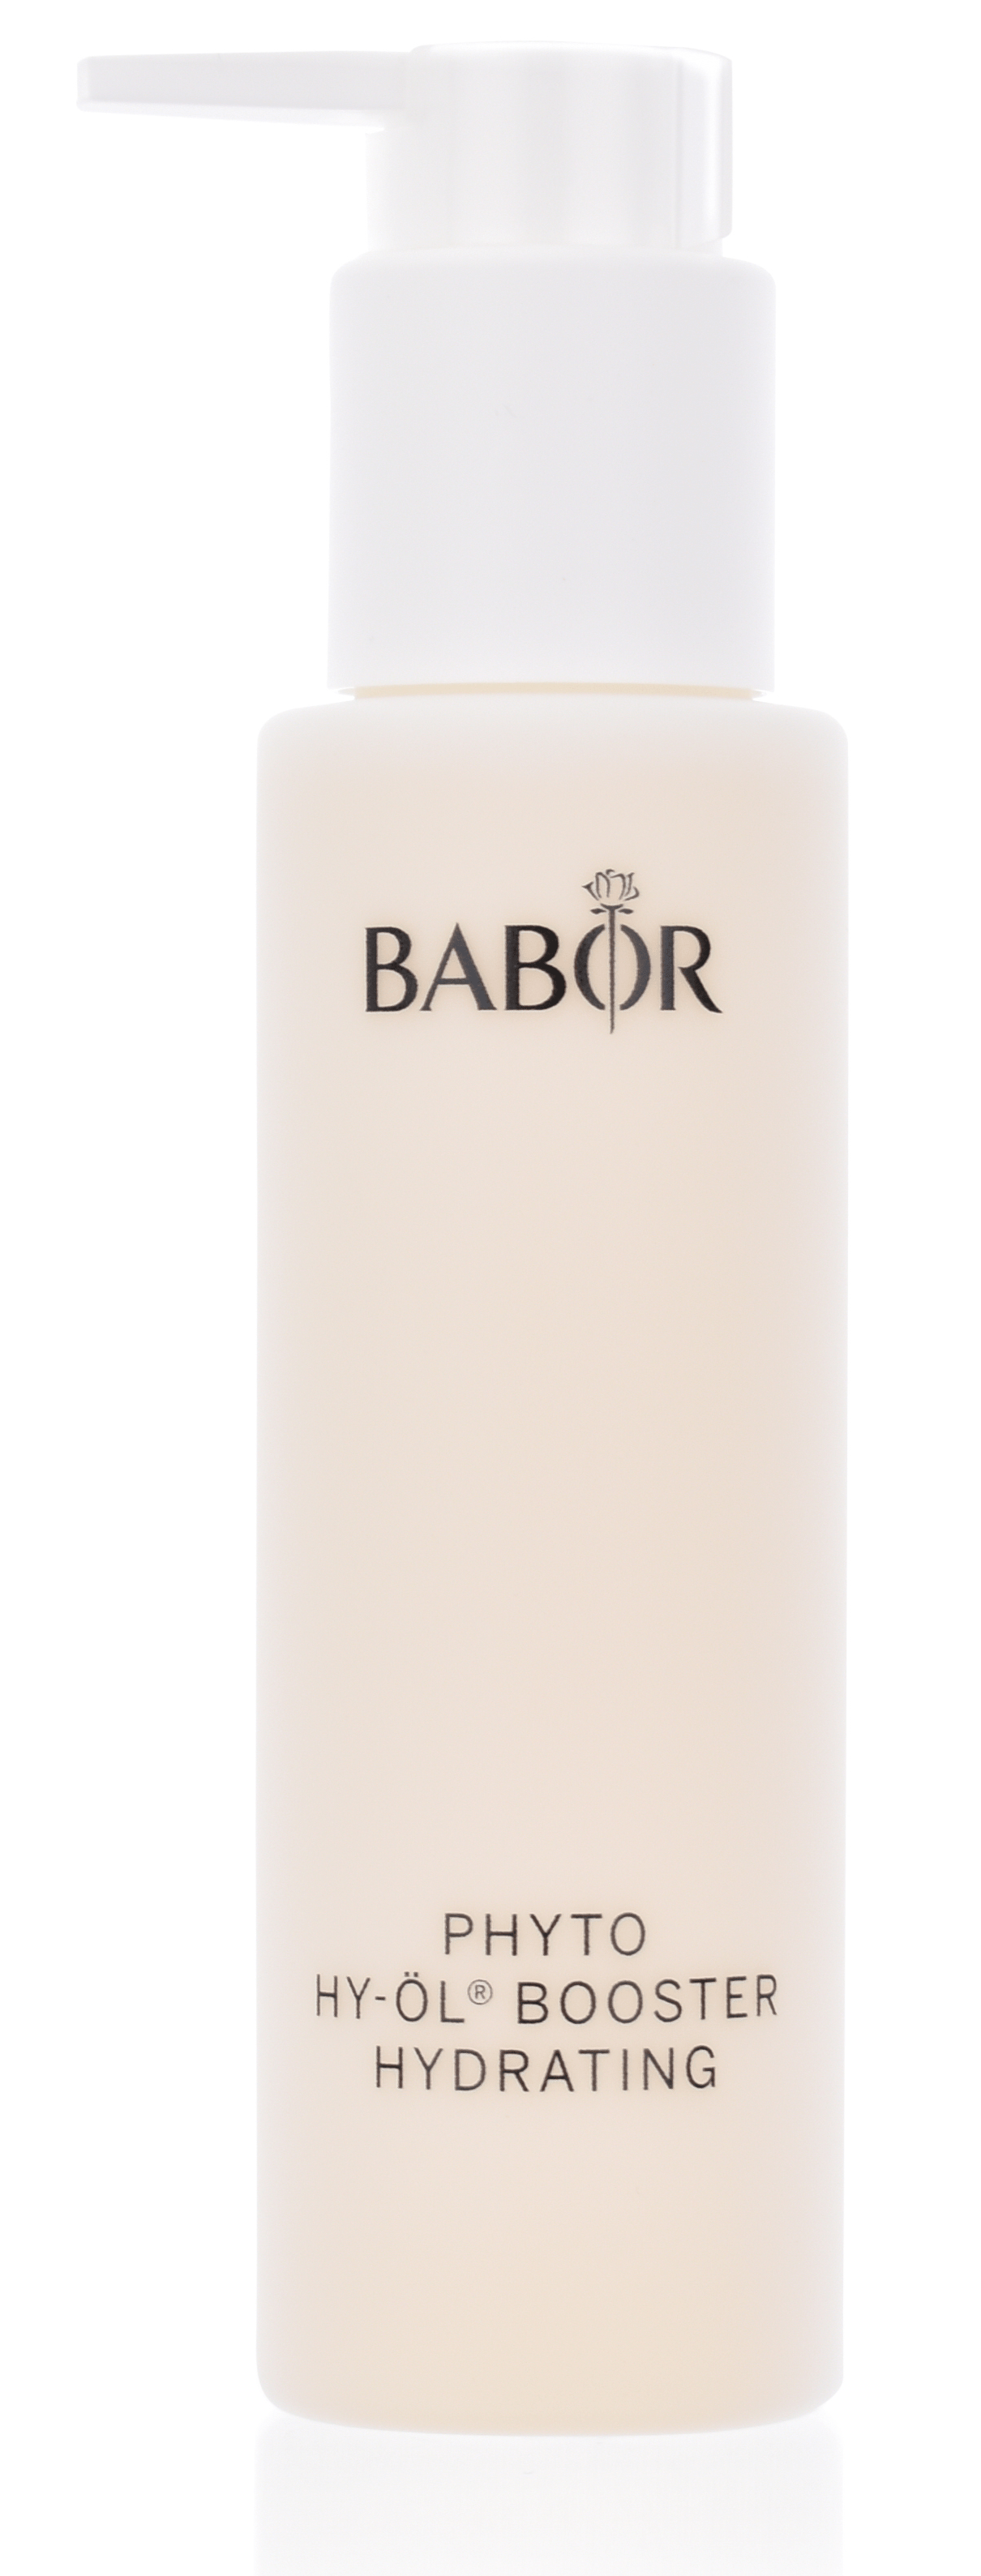 BABOR Cleansing - Phyto HY-ÖL Booster Hydrating 100 ml